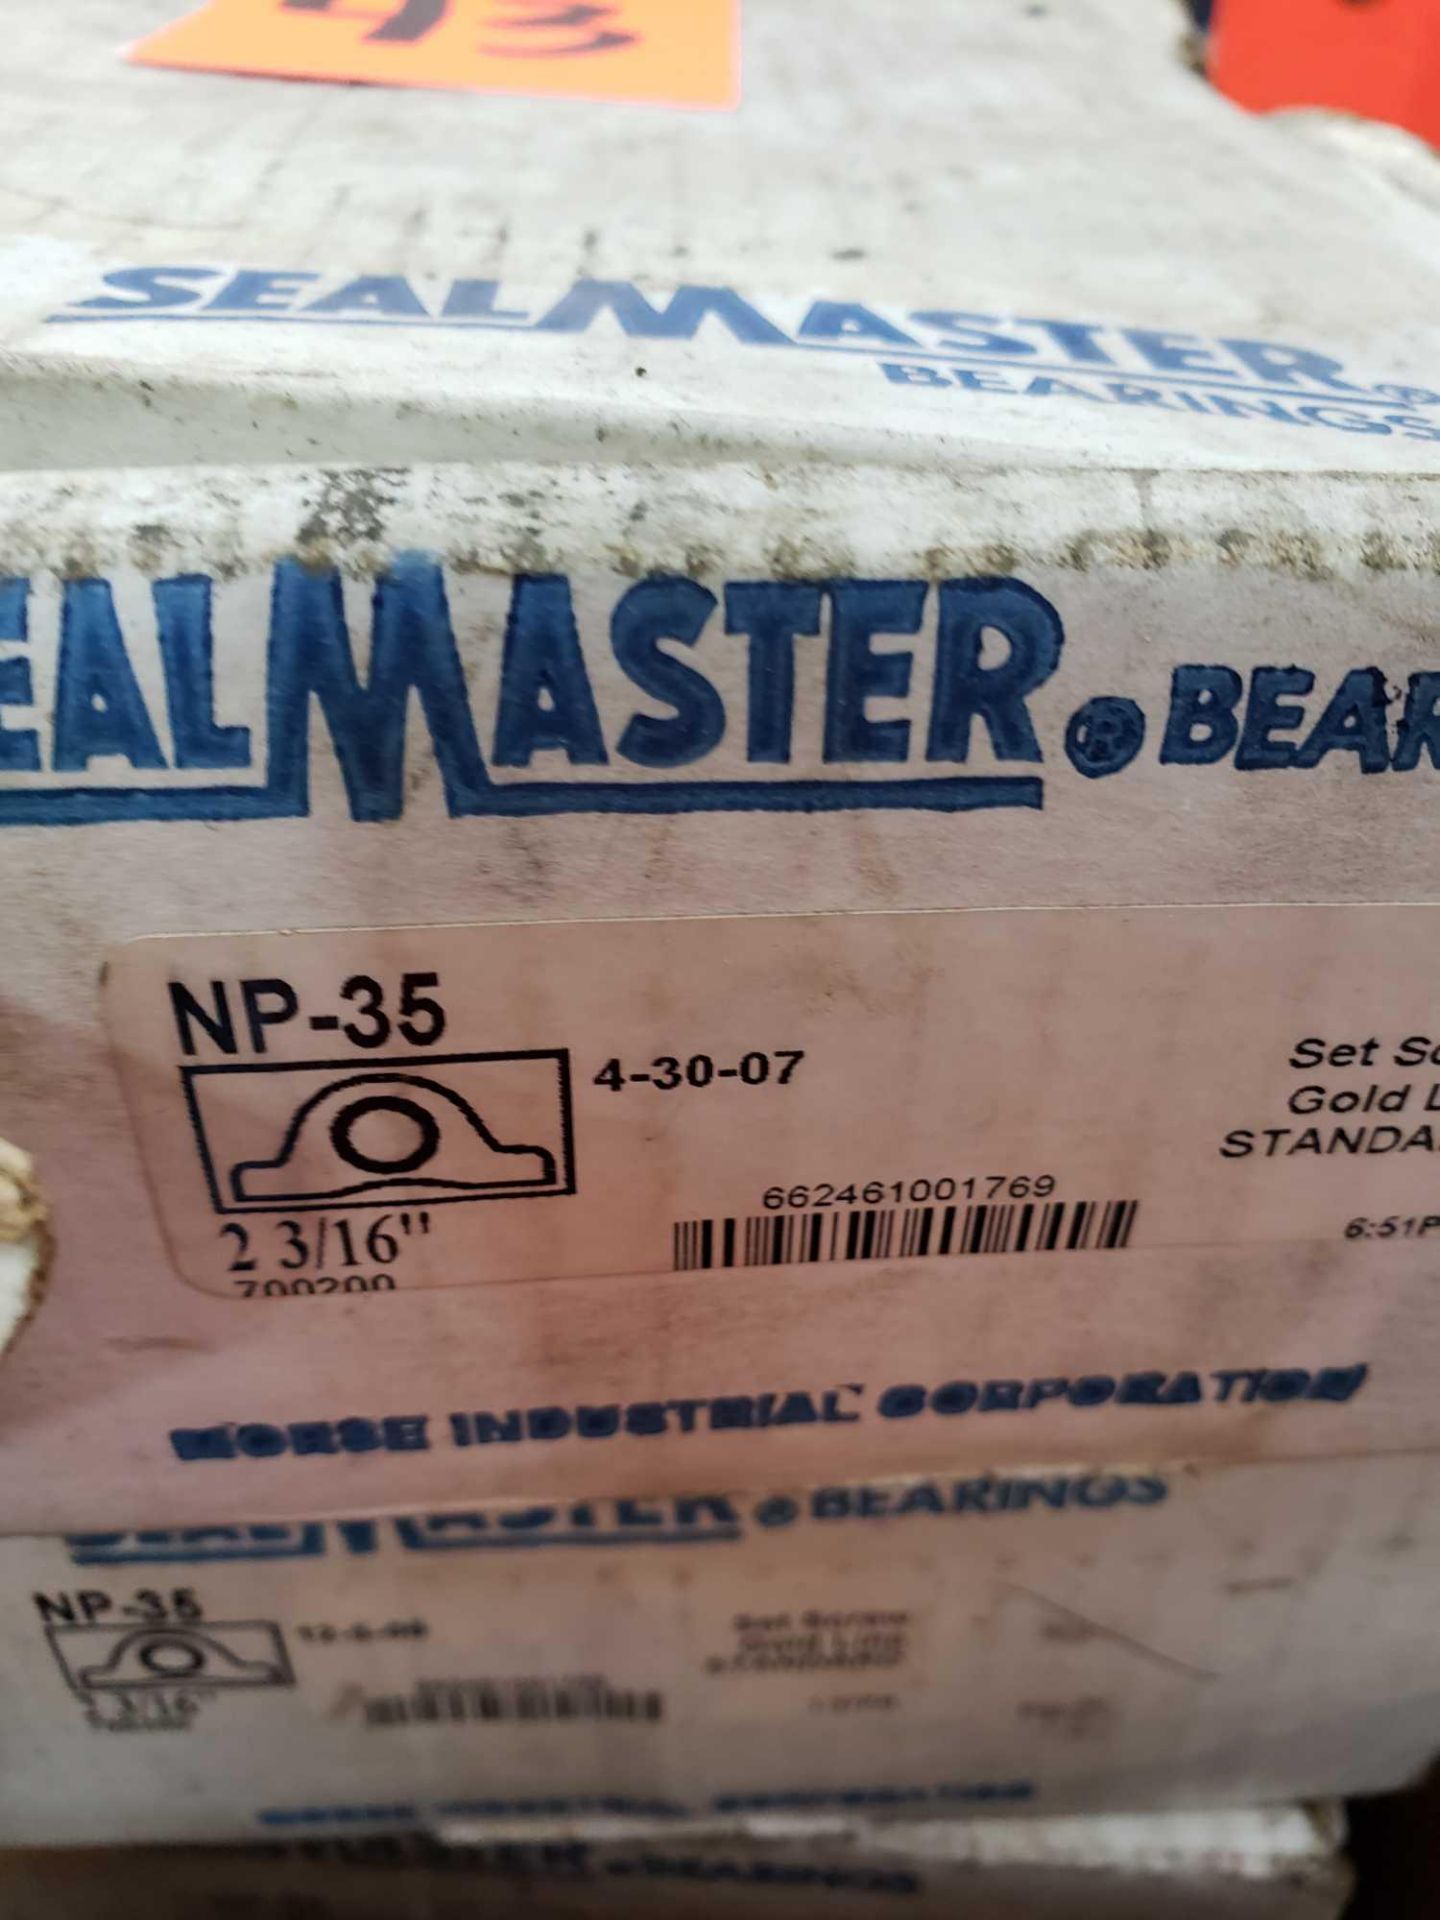 Qty 3 - Sealmaster Bearings Model NP-35. New in boxes. - Image 3 of 3